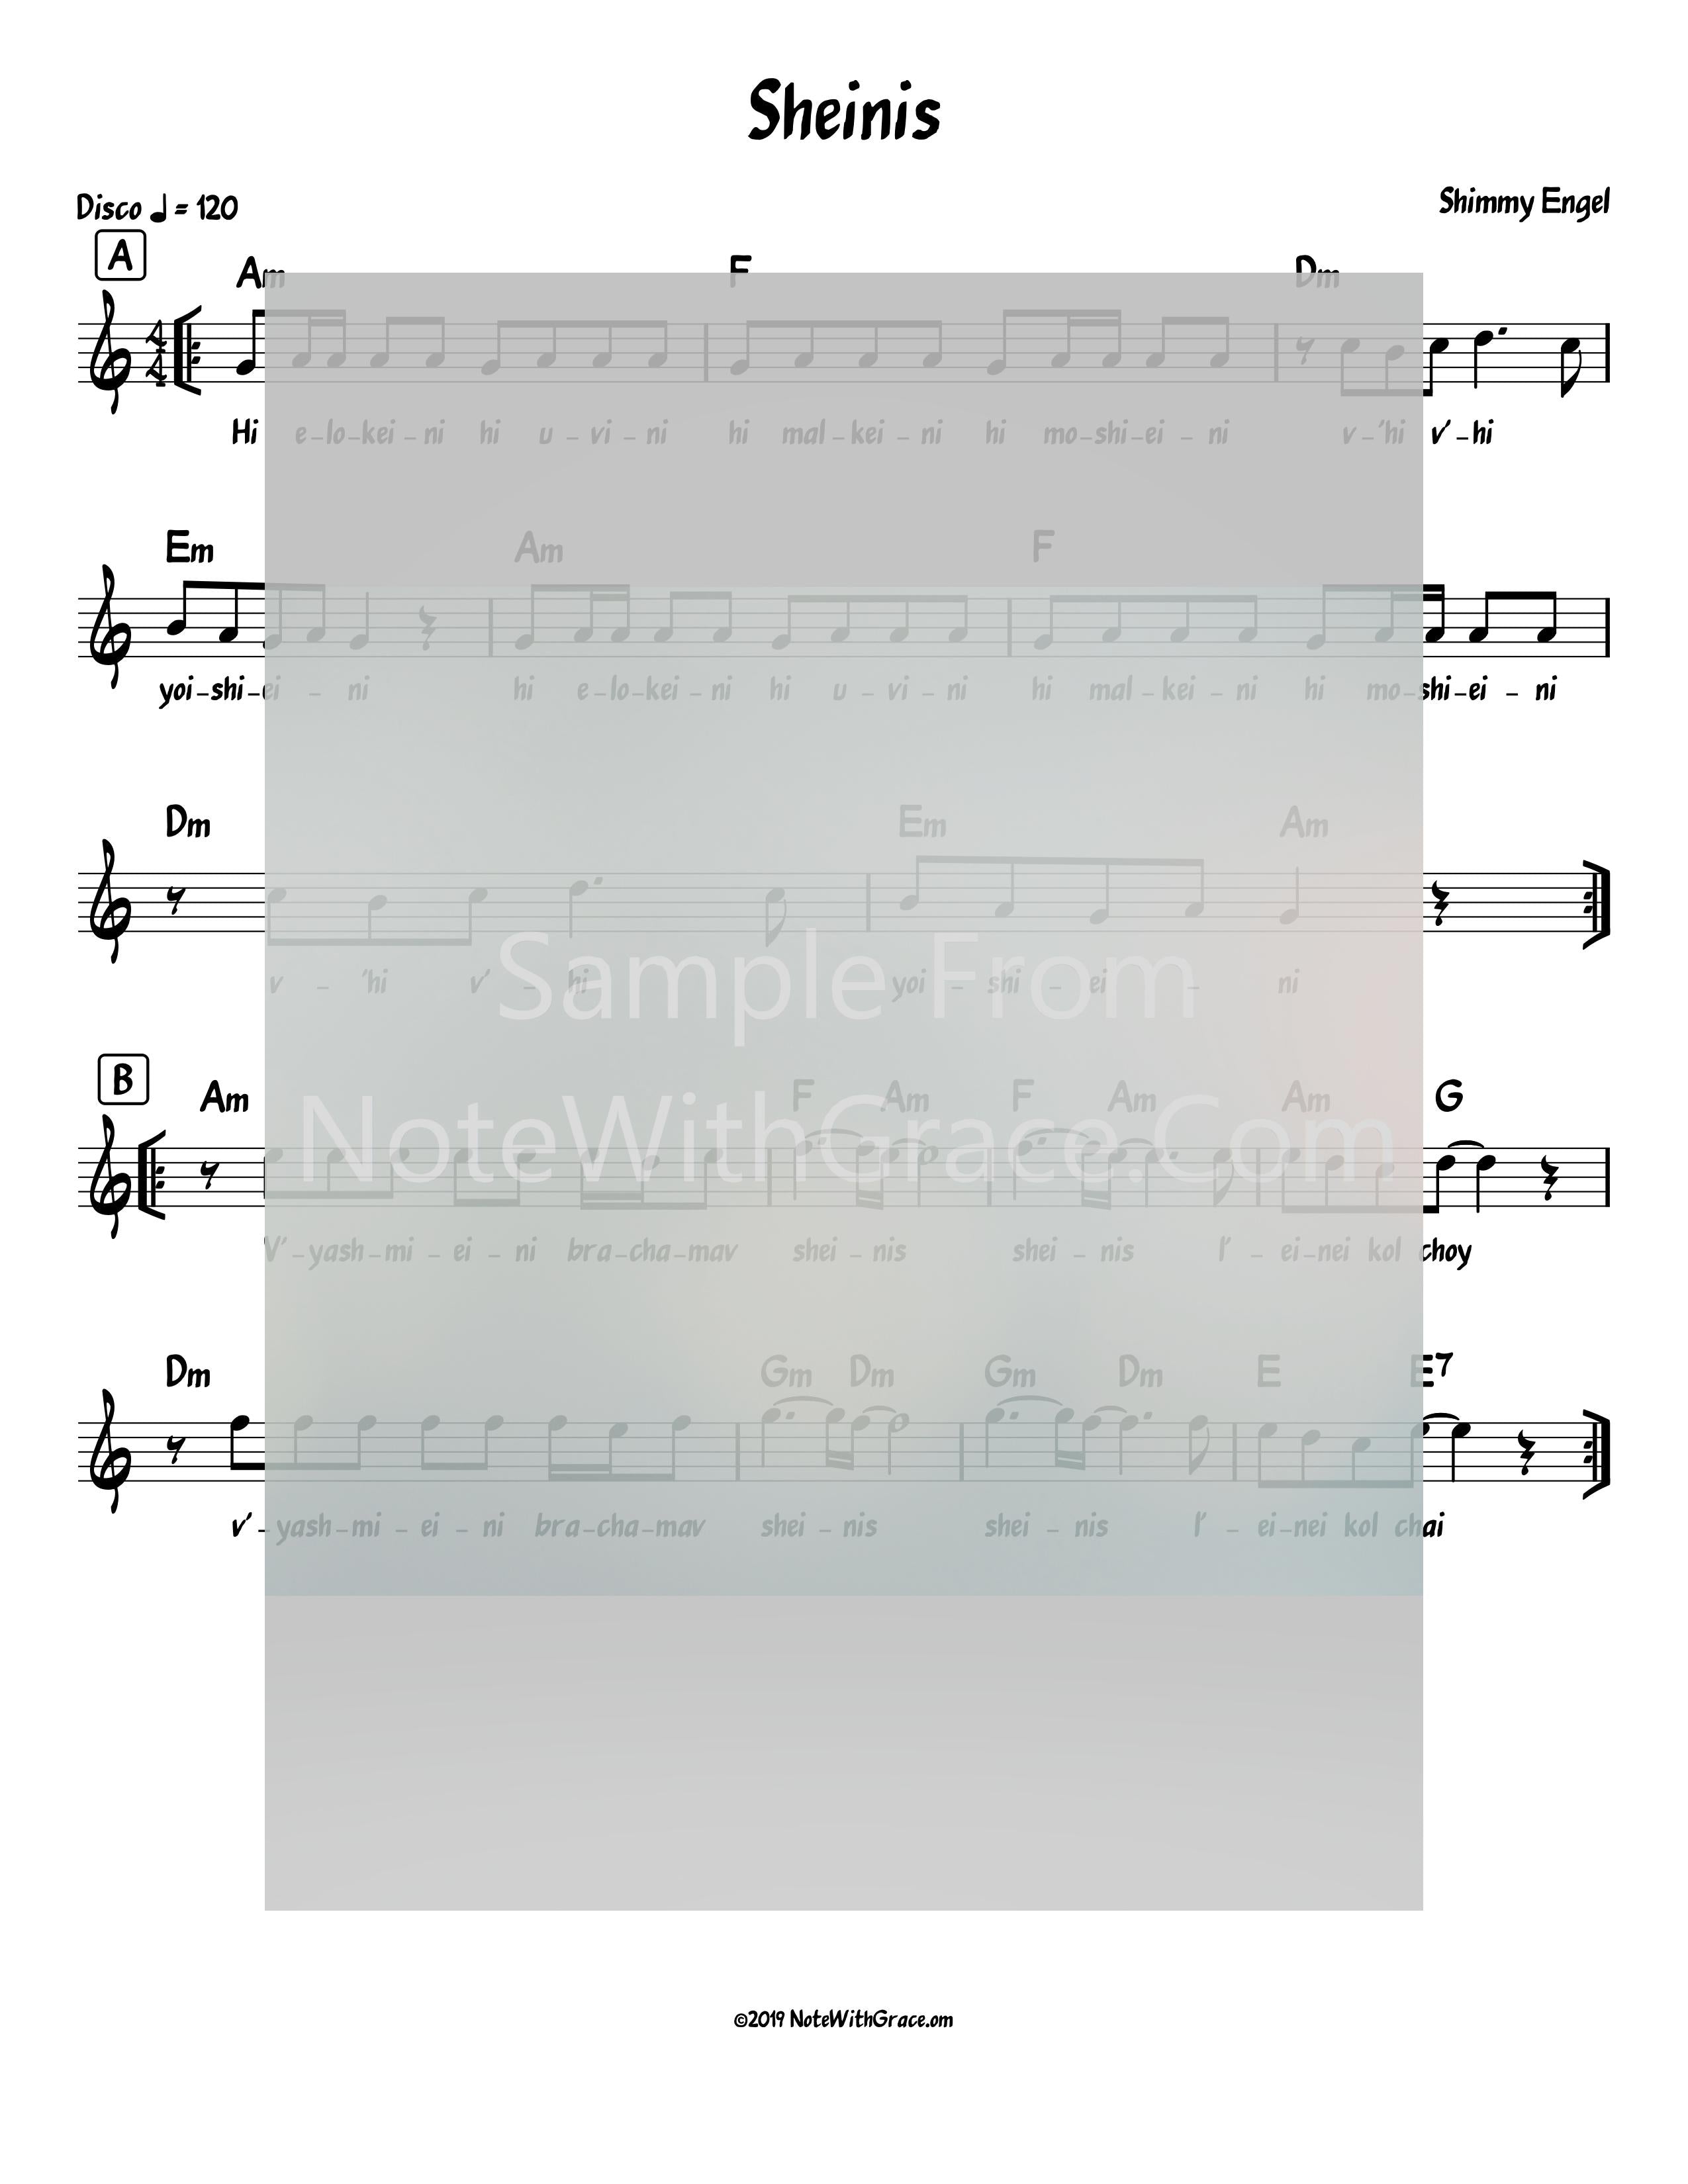 Sheinis Lead Sheet (Shimmy Engel) Album: Sheinis Released 2018-Sheet music-NoteWithGrace.com